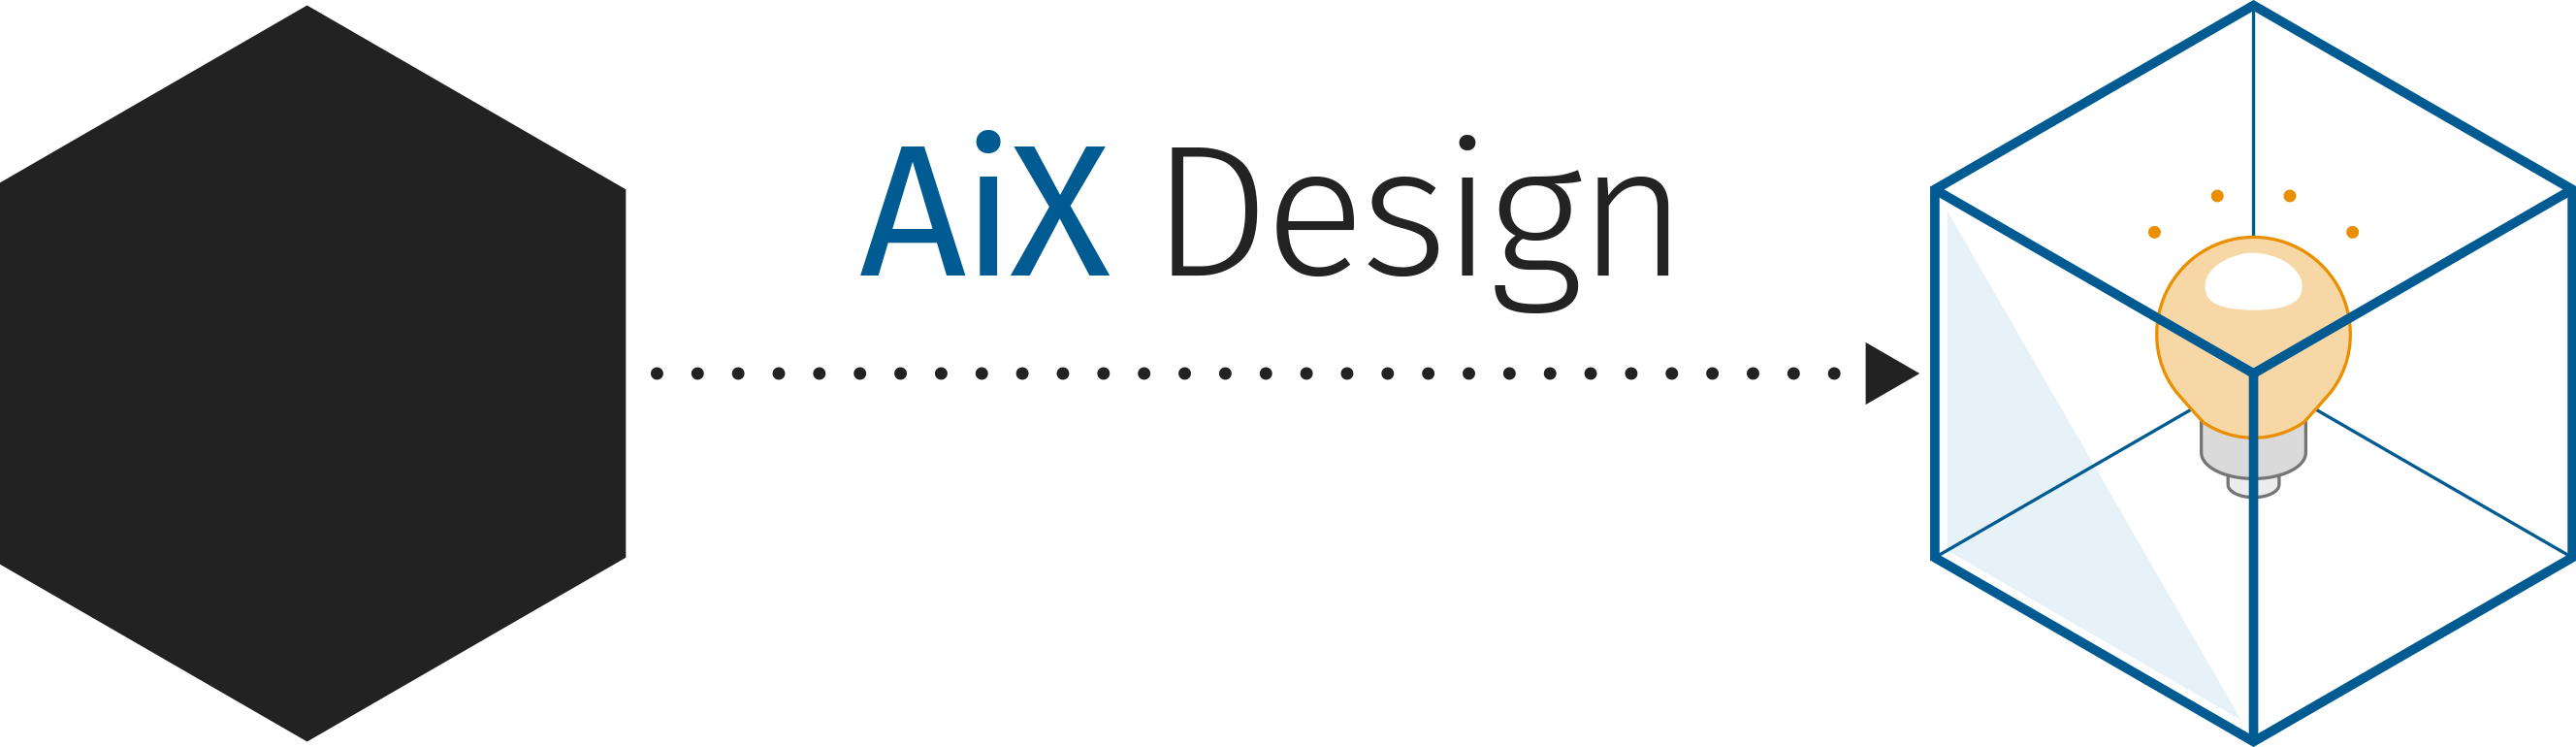 The Need for AiX Design